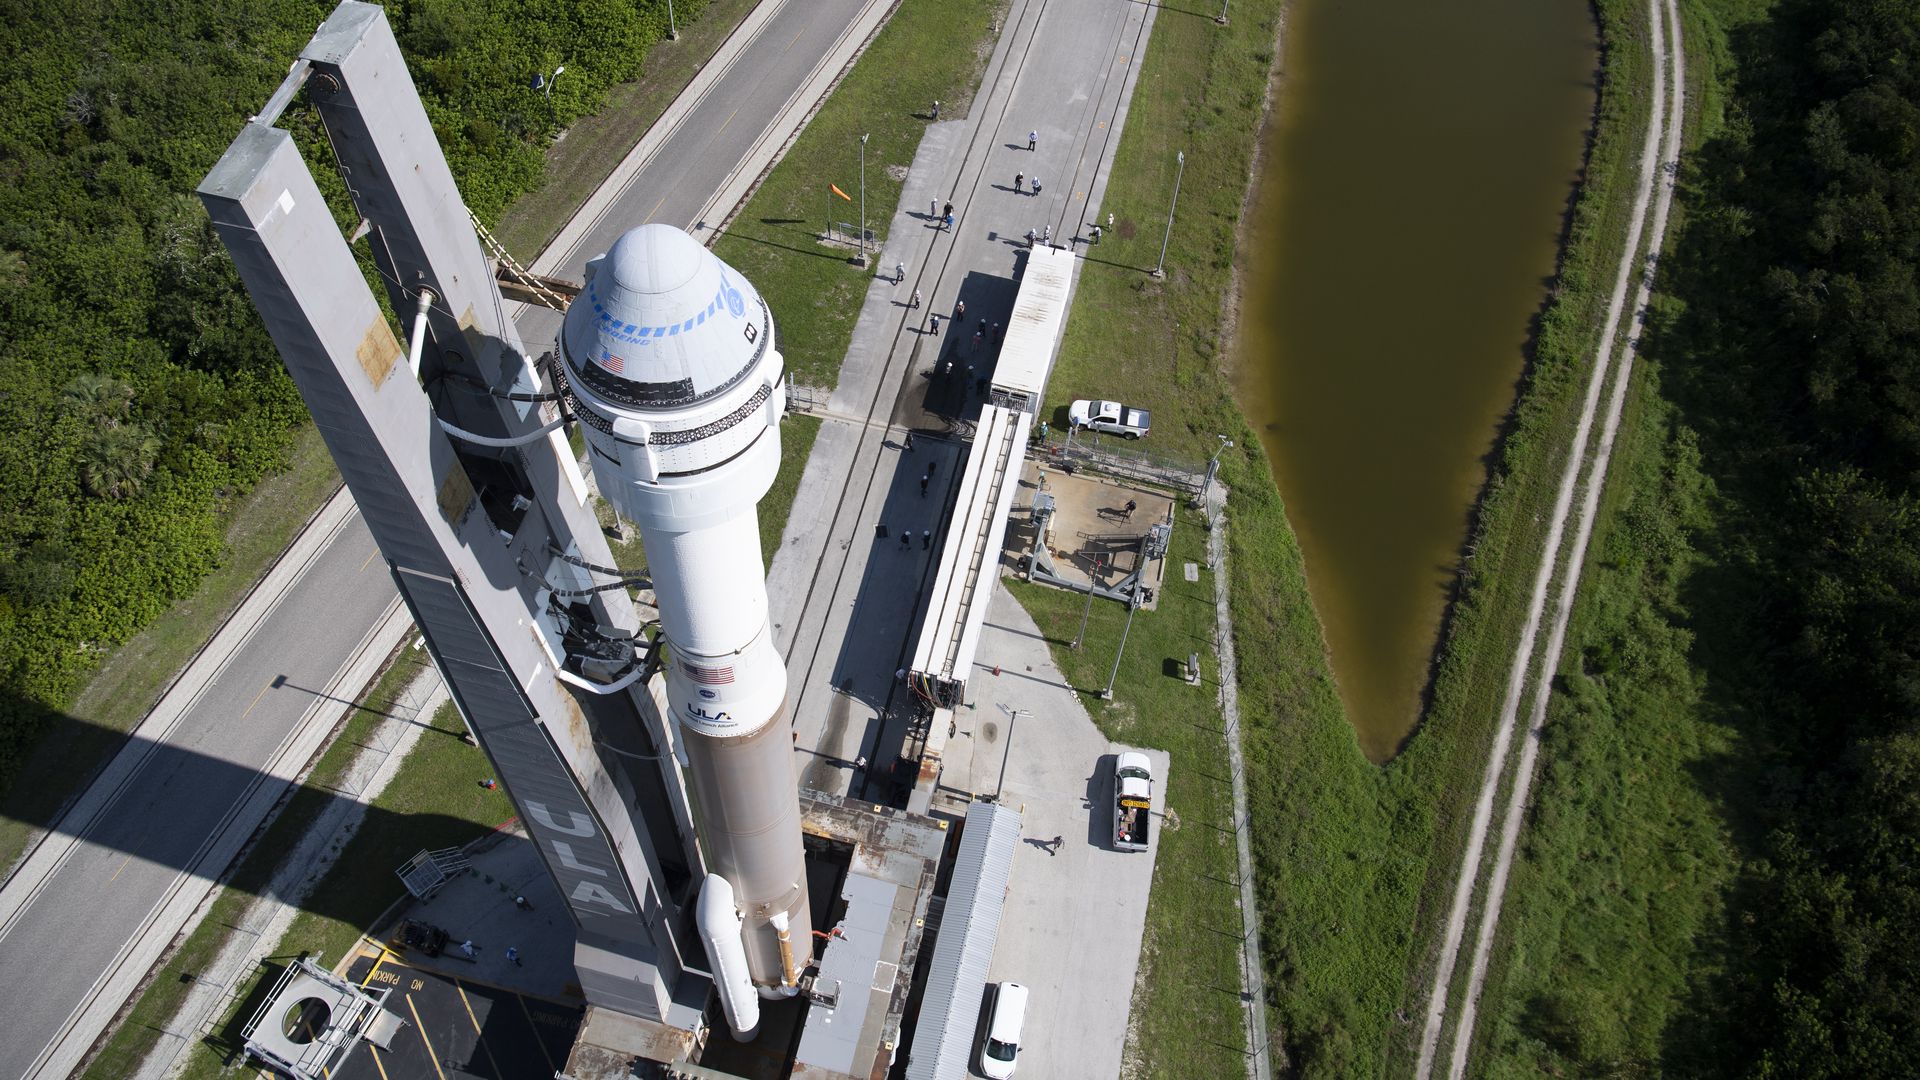 Boeing's Starliner spacecraft atop a United Launch Alliance rocket on a lunch pad in July 2021 at Cape Canaveral Space Force Station in Florida.